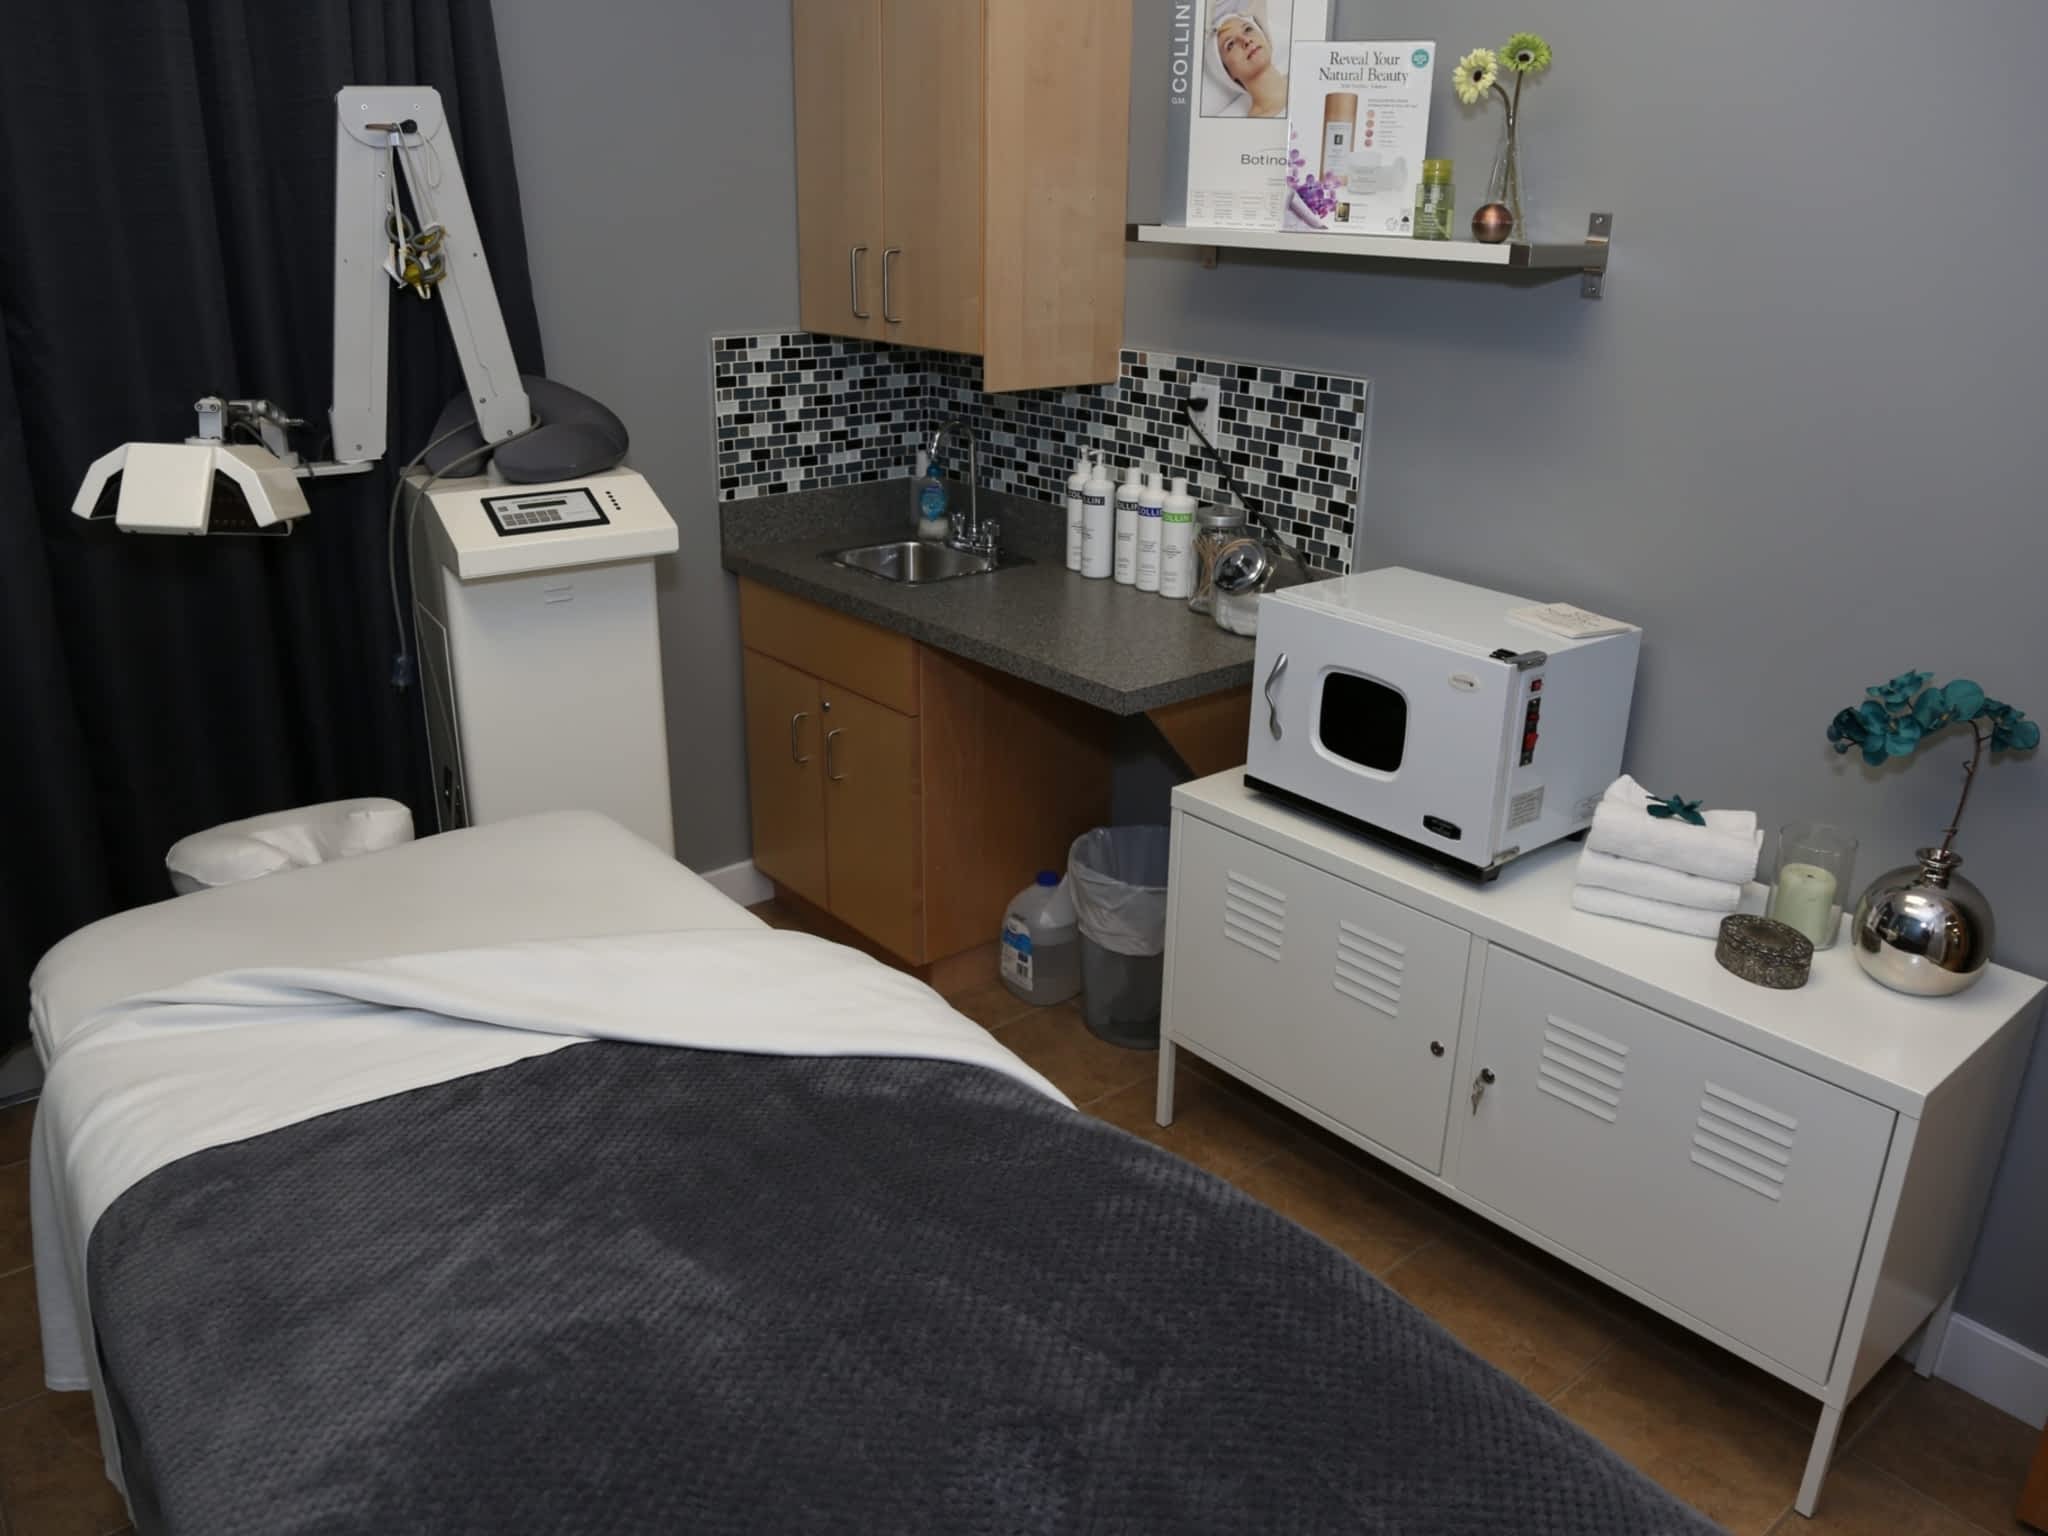 photo md Spa & Laser Clinic